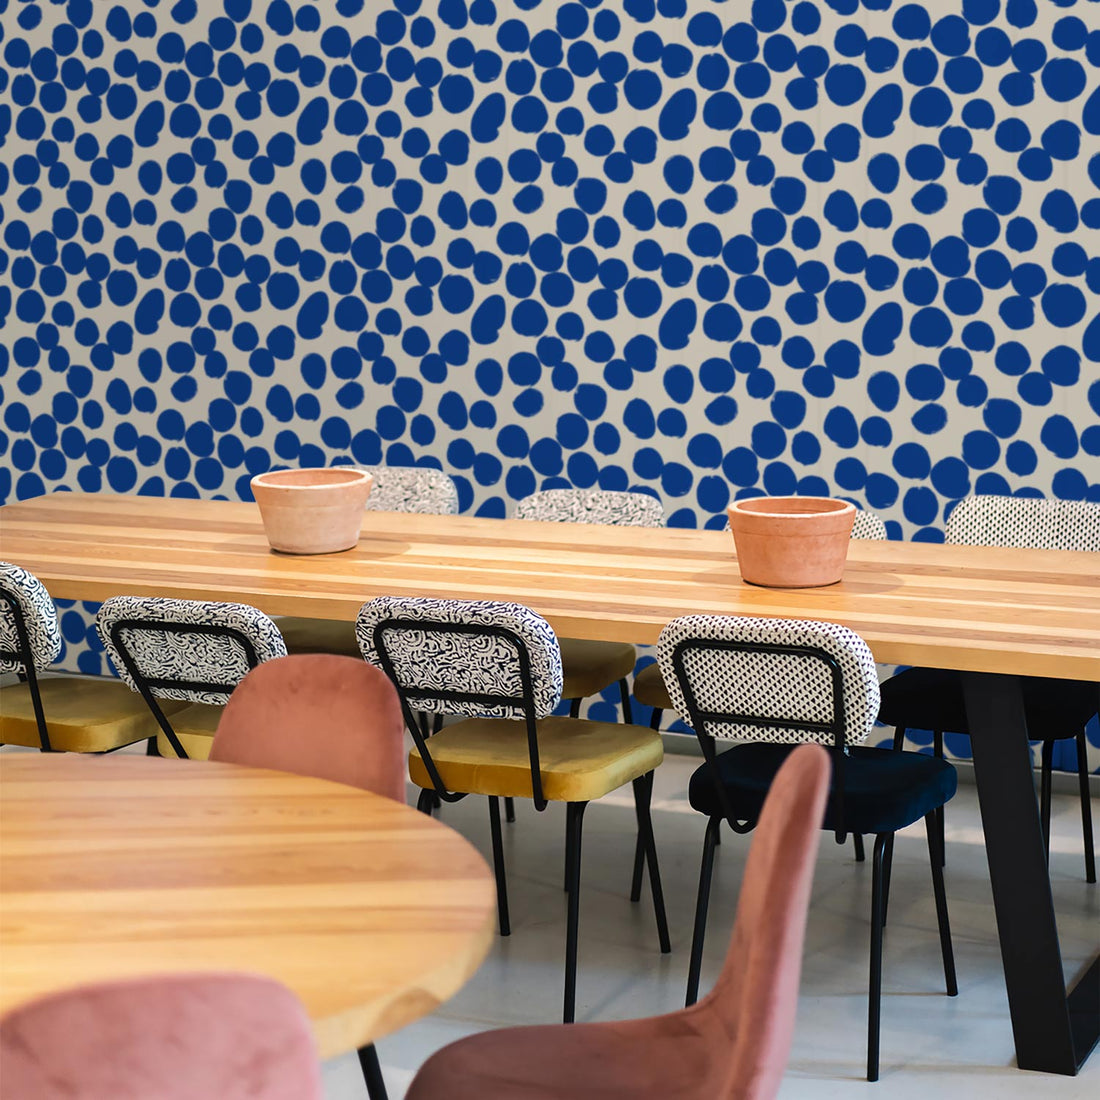 bright blue dotted wallpaper for dining room interior